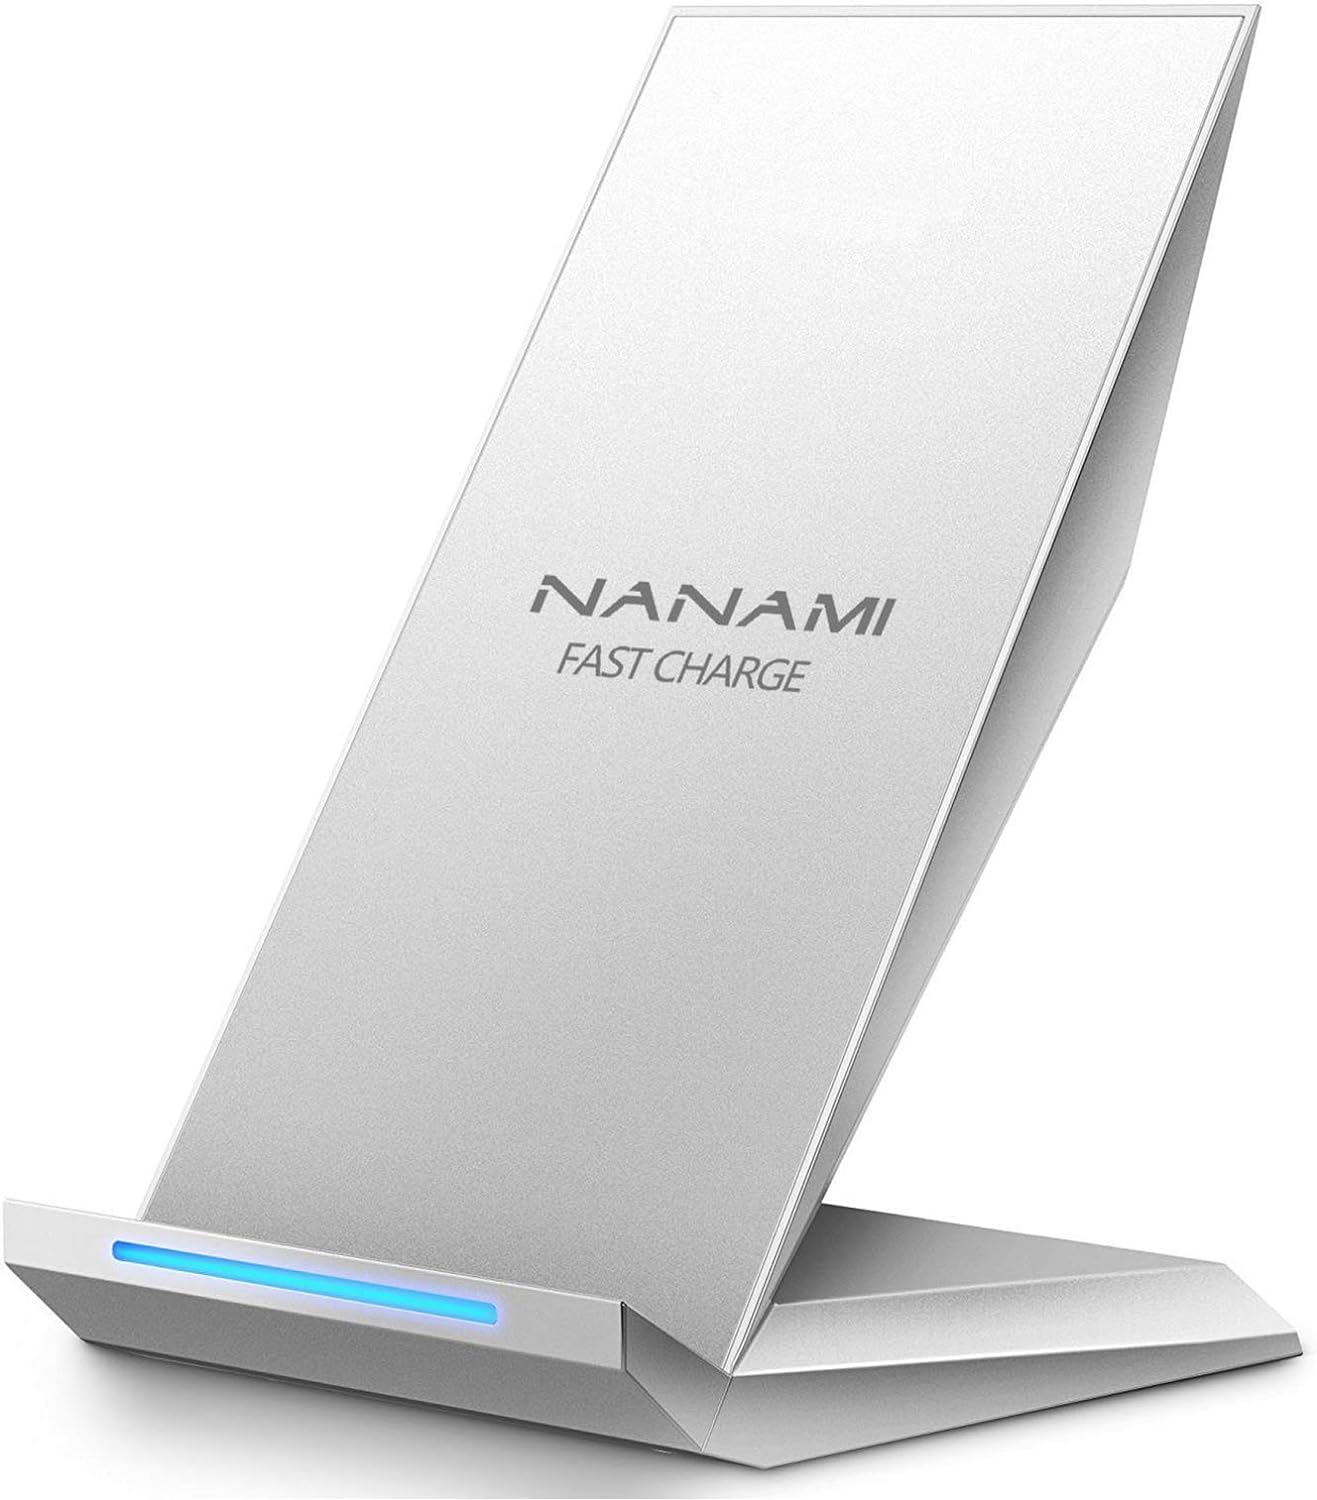 Fast Wireless Charger, NANAMI Qi Certified Wireless Charging Stand Compatible iPhone 15/14/13/12/11 Pro/XS Max/XR/8, Samsung Galaxy S24/S23/S22/S21/S20/S10/S9/Note 20 Ultra/10/9 and Qi-Enabled Phone